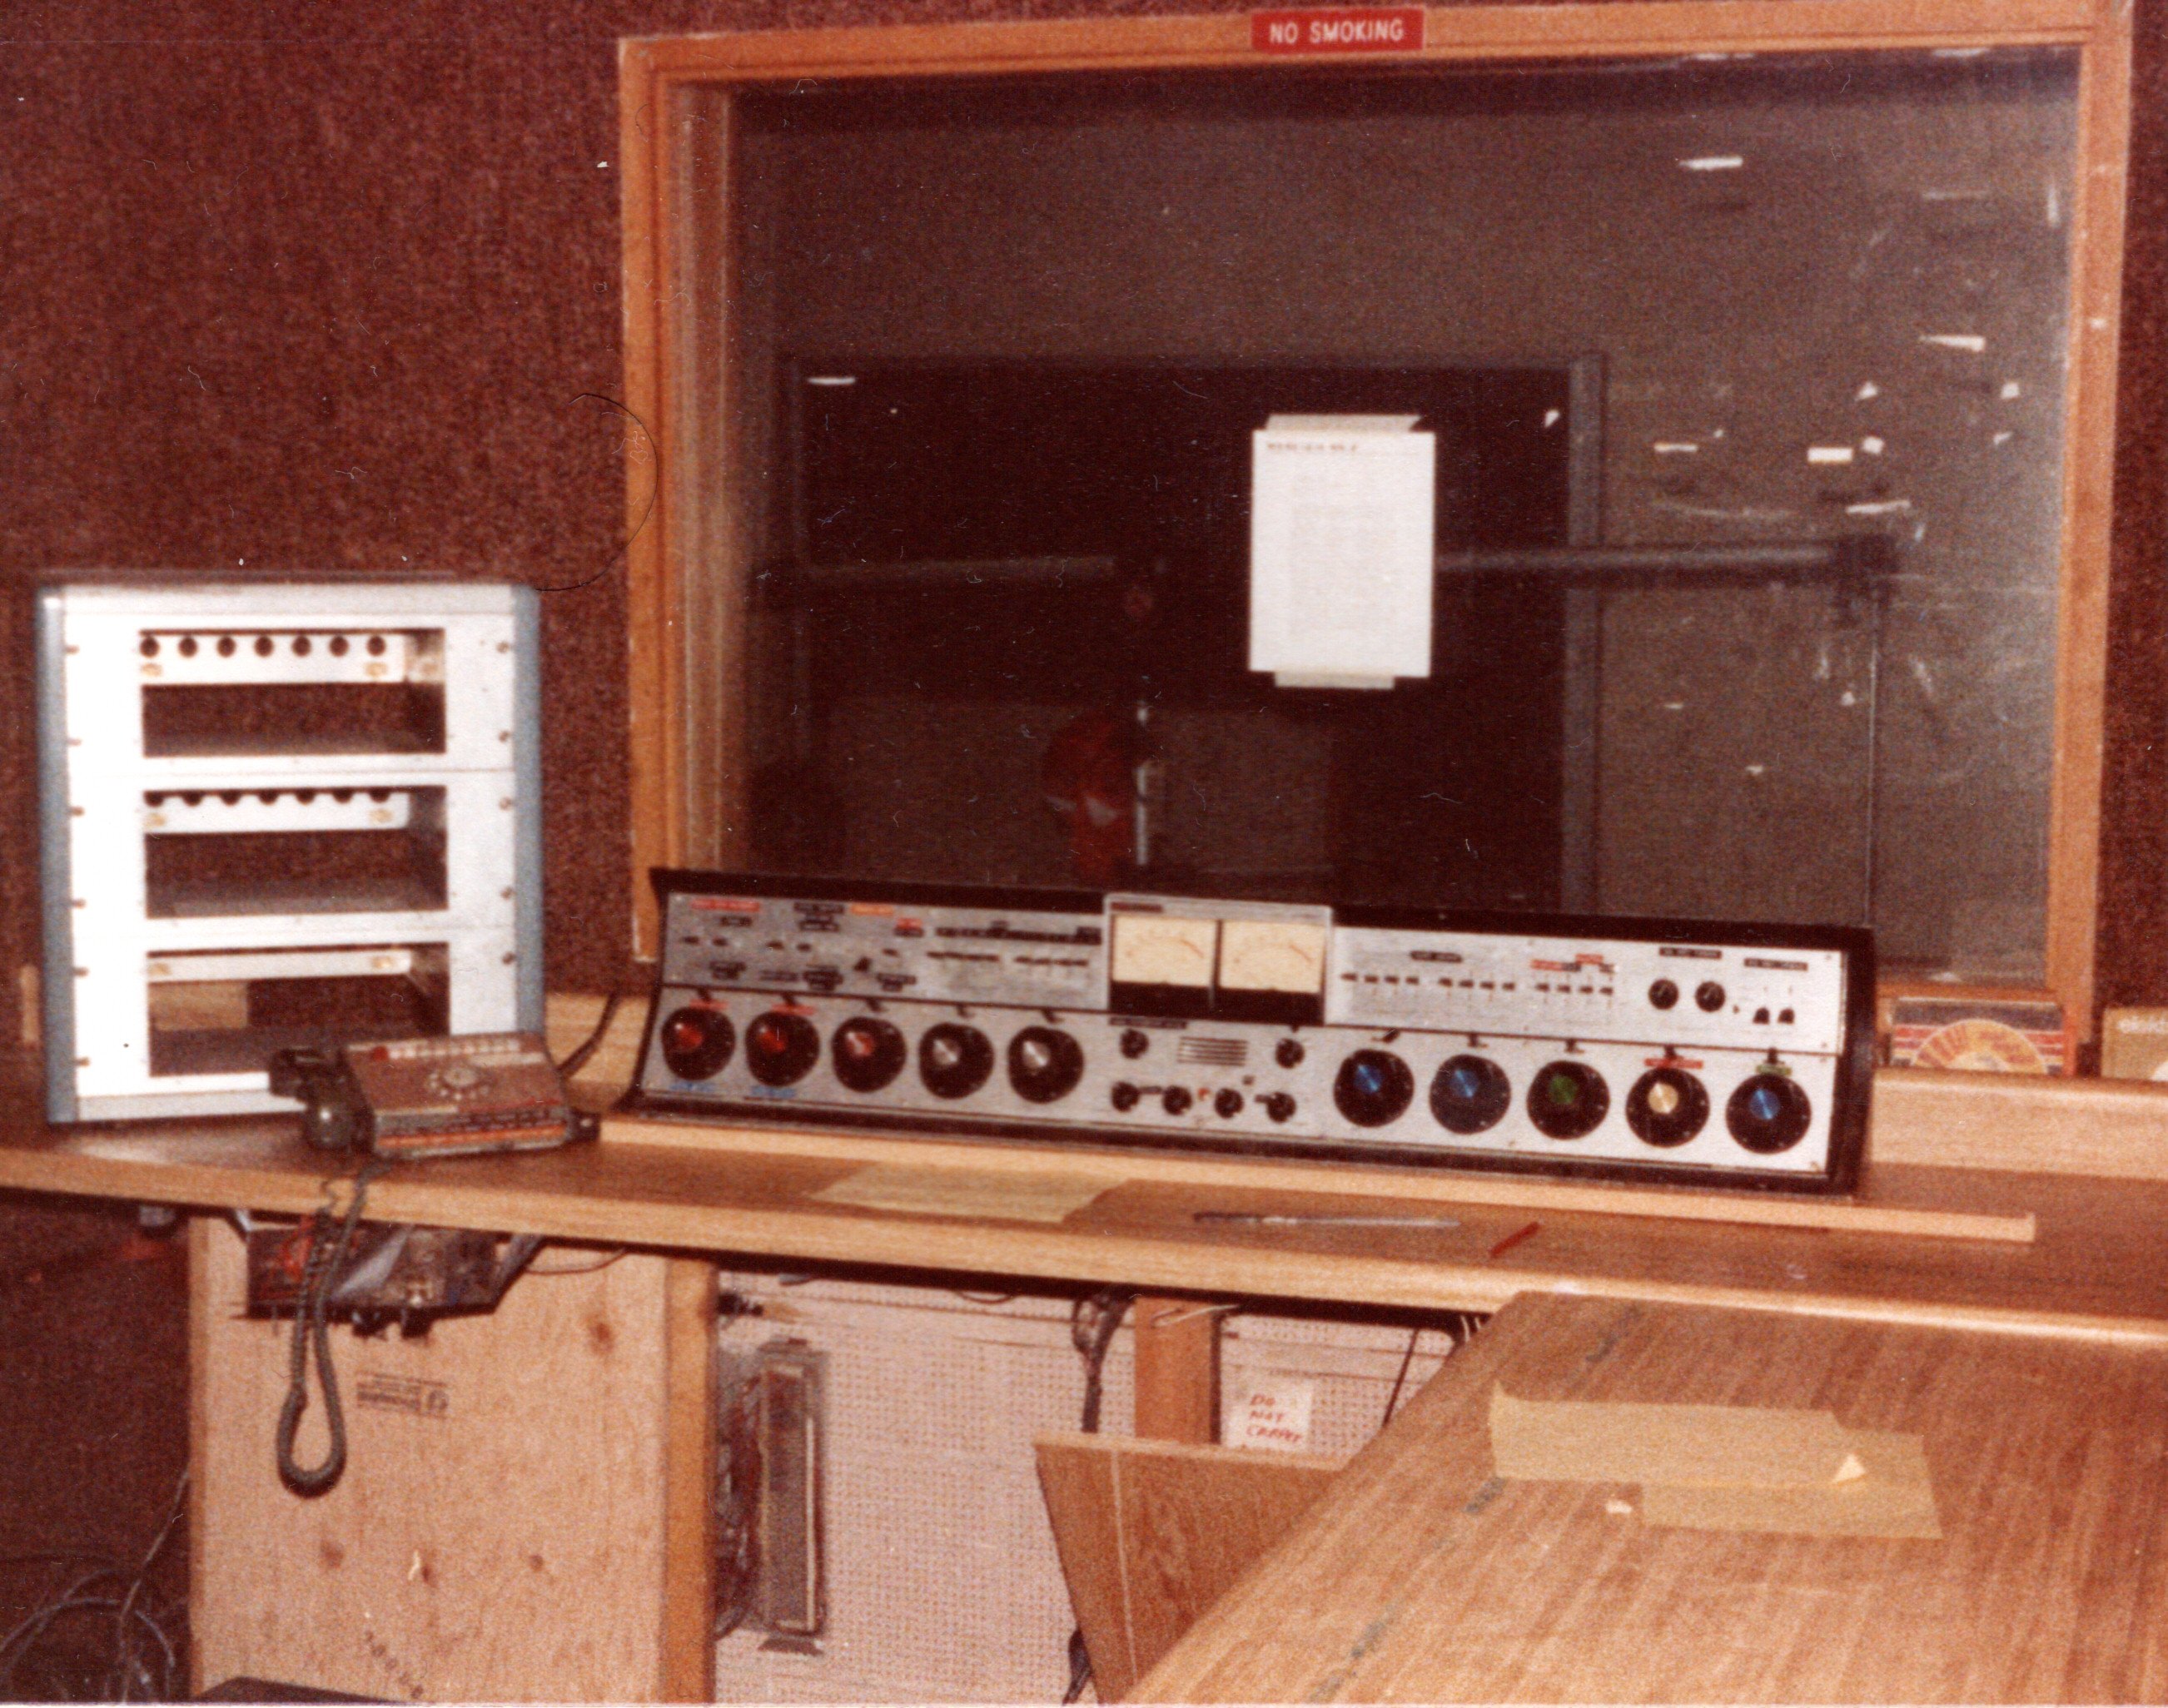 1983 - FM Control is almost ready to be the year again. This configuration stayed until mid 2010s